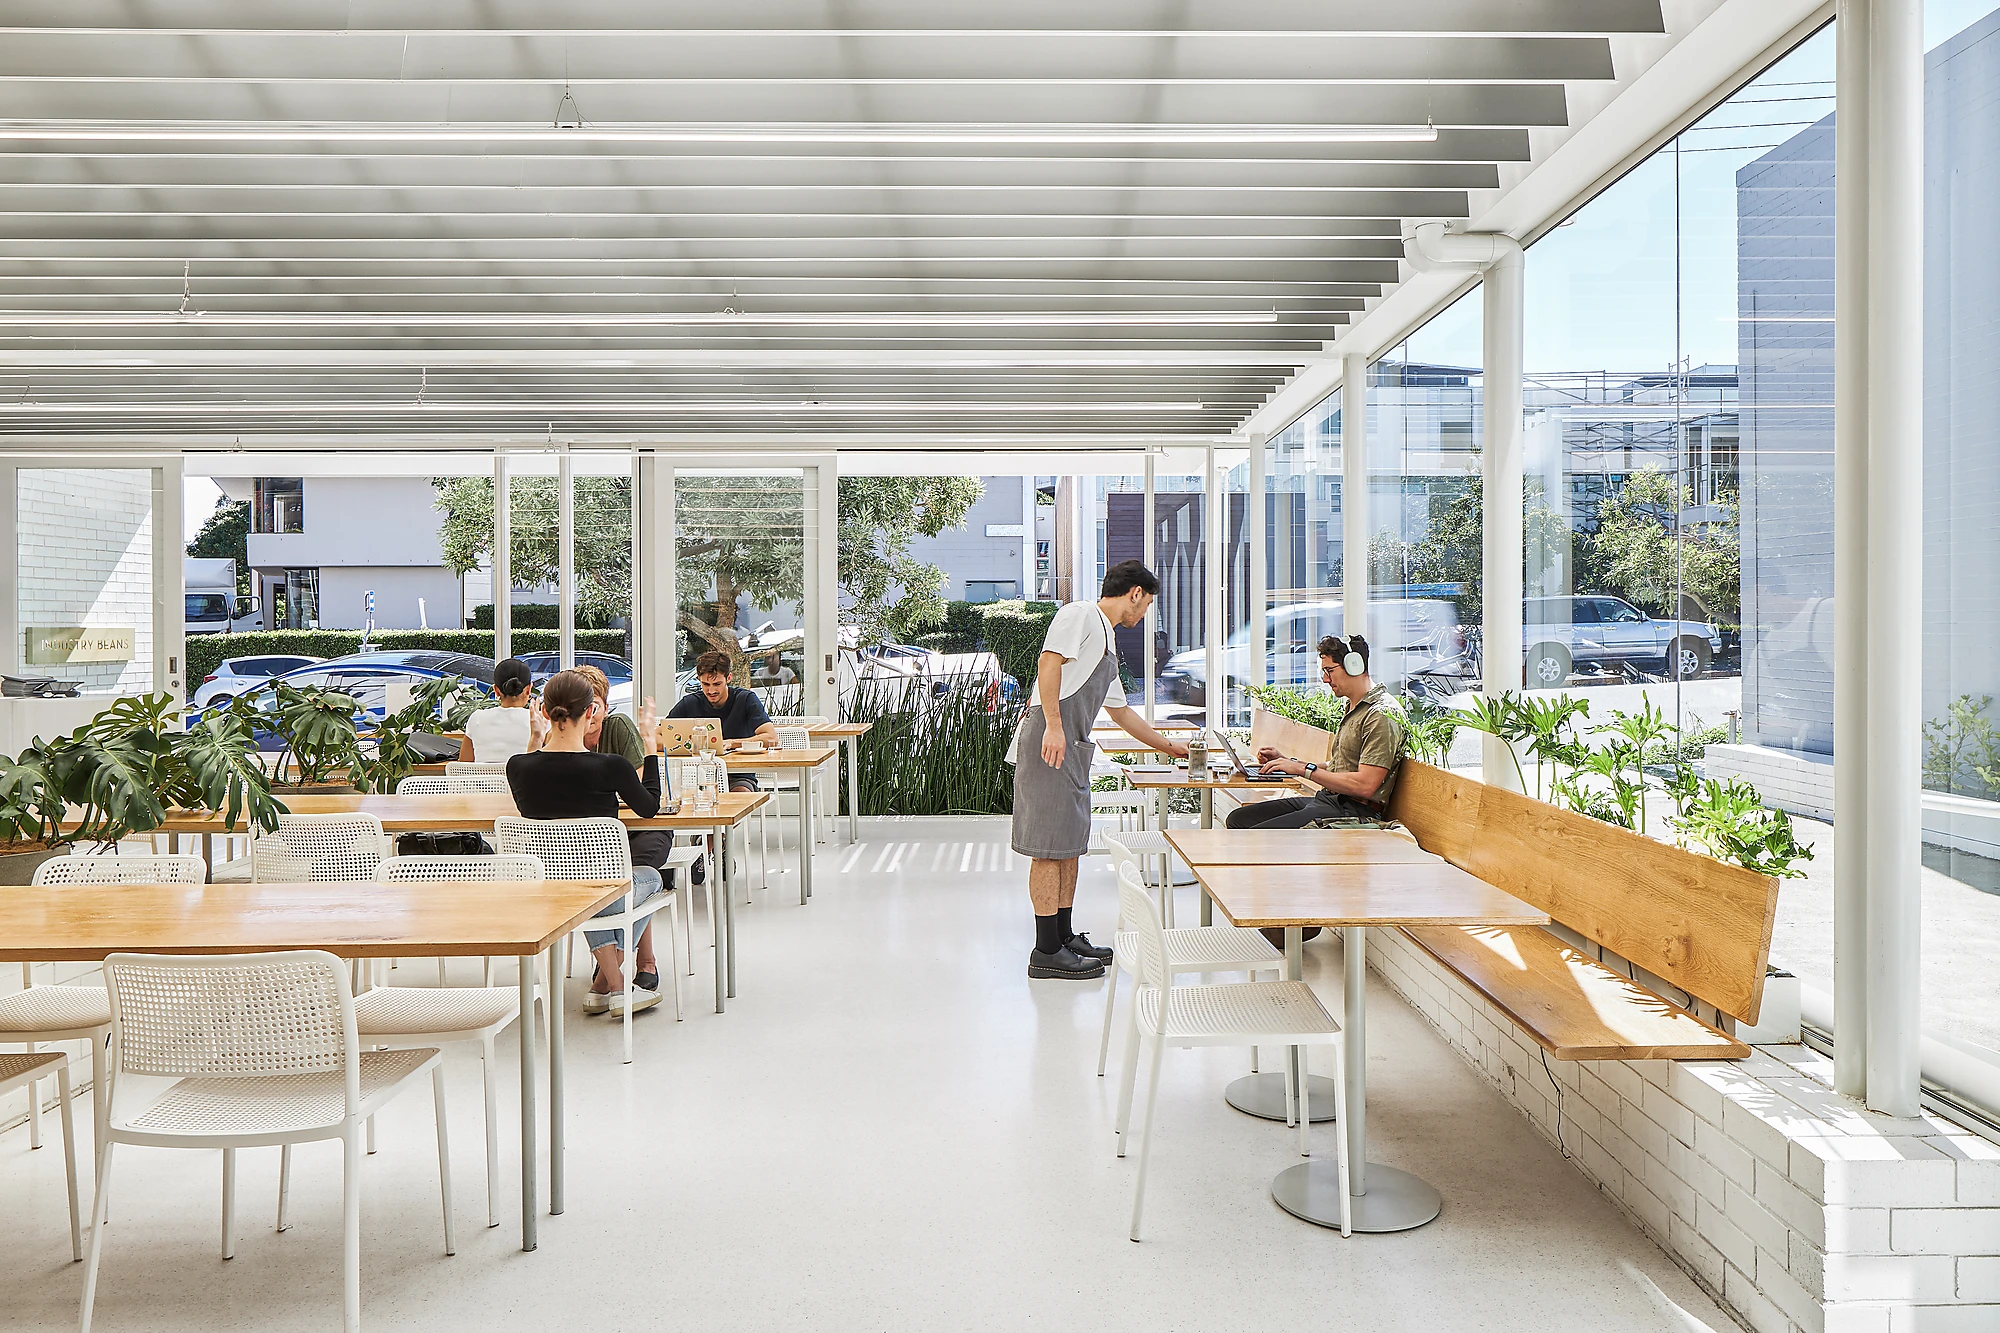 White cafe, wooden seating and tables, floor to ceiling windows